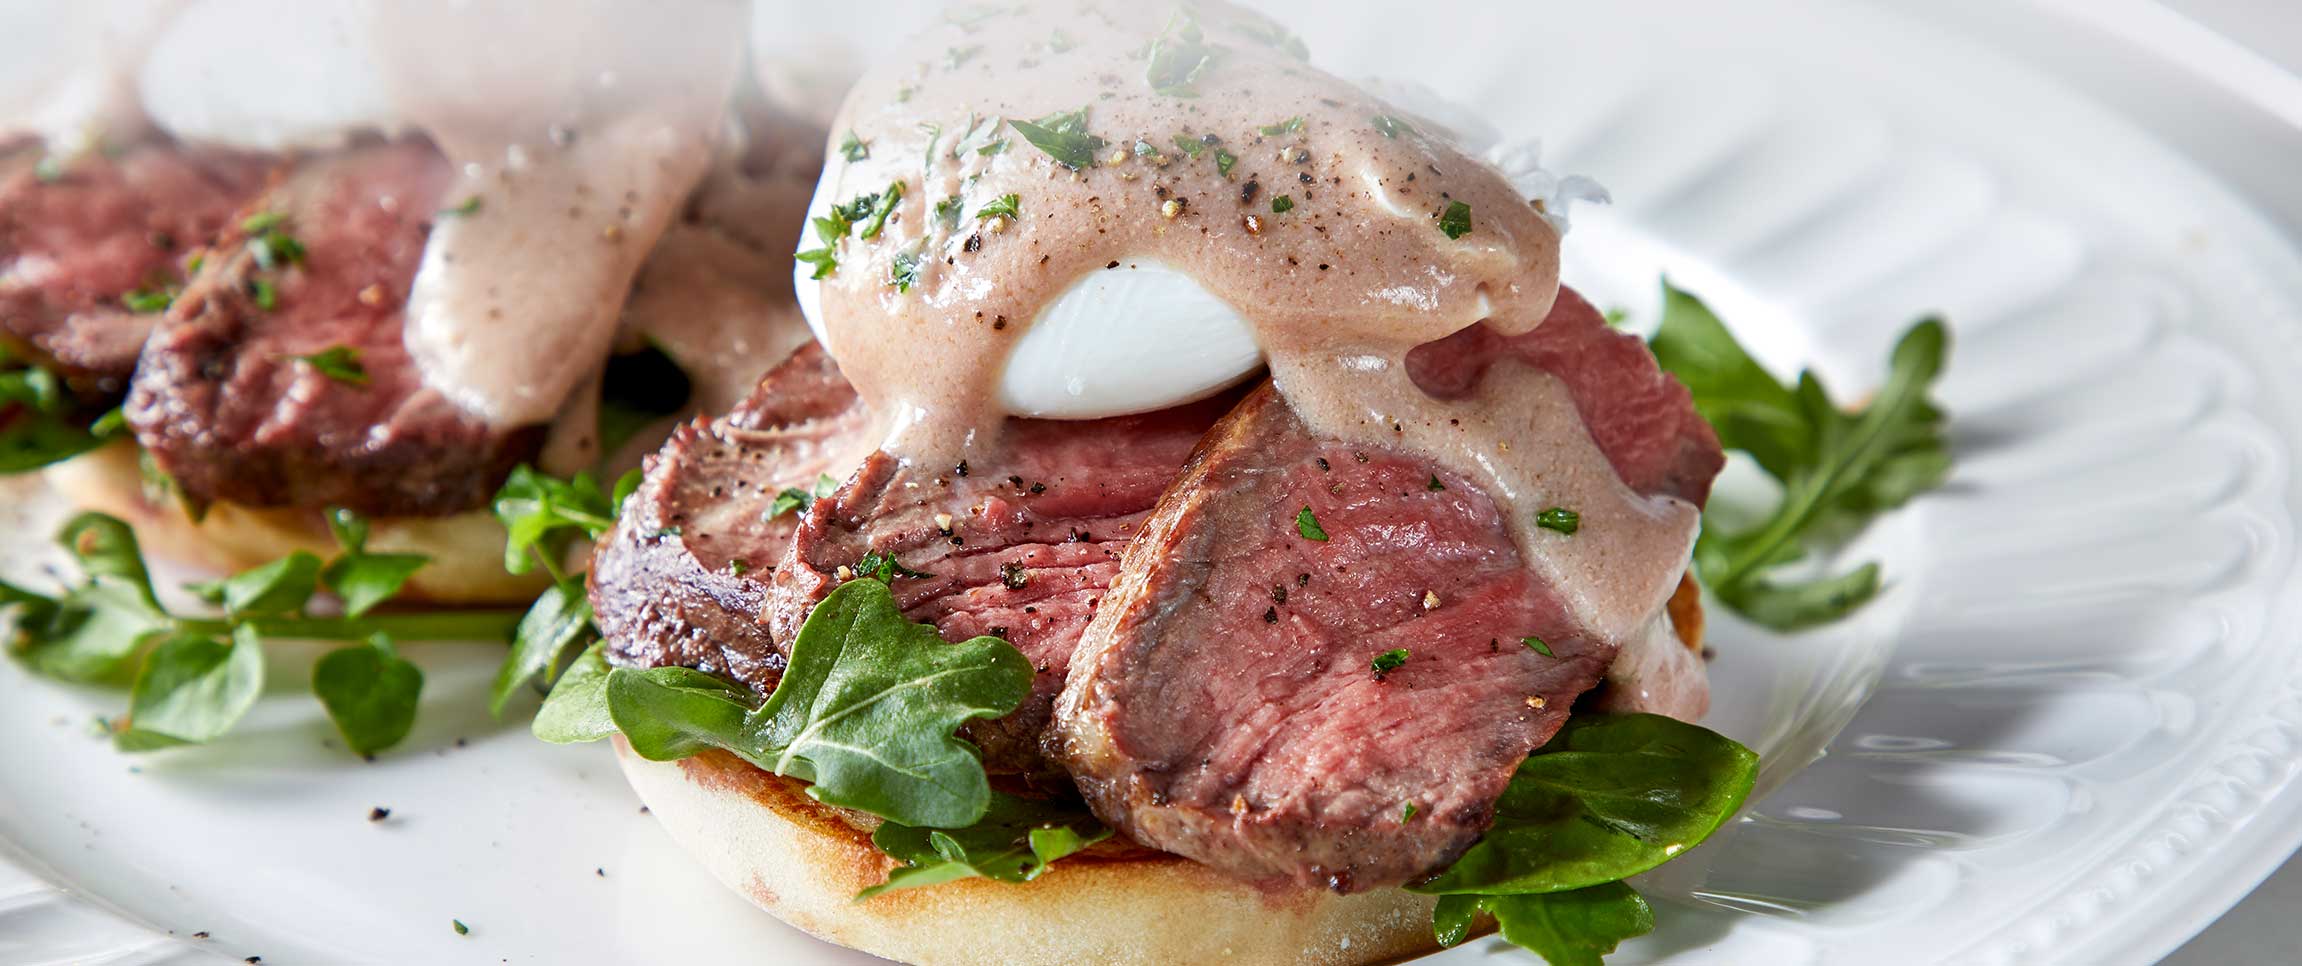 Steak and Eggs Benedict with Red Wine Hollandaise